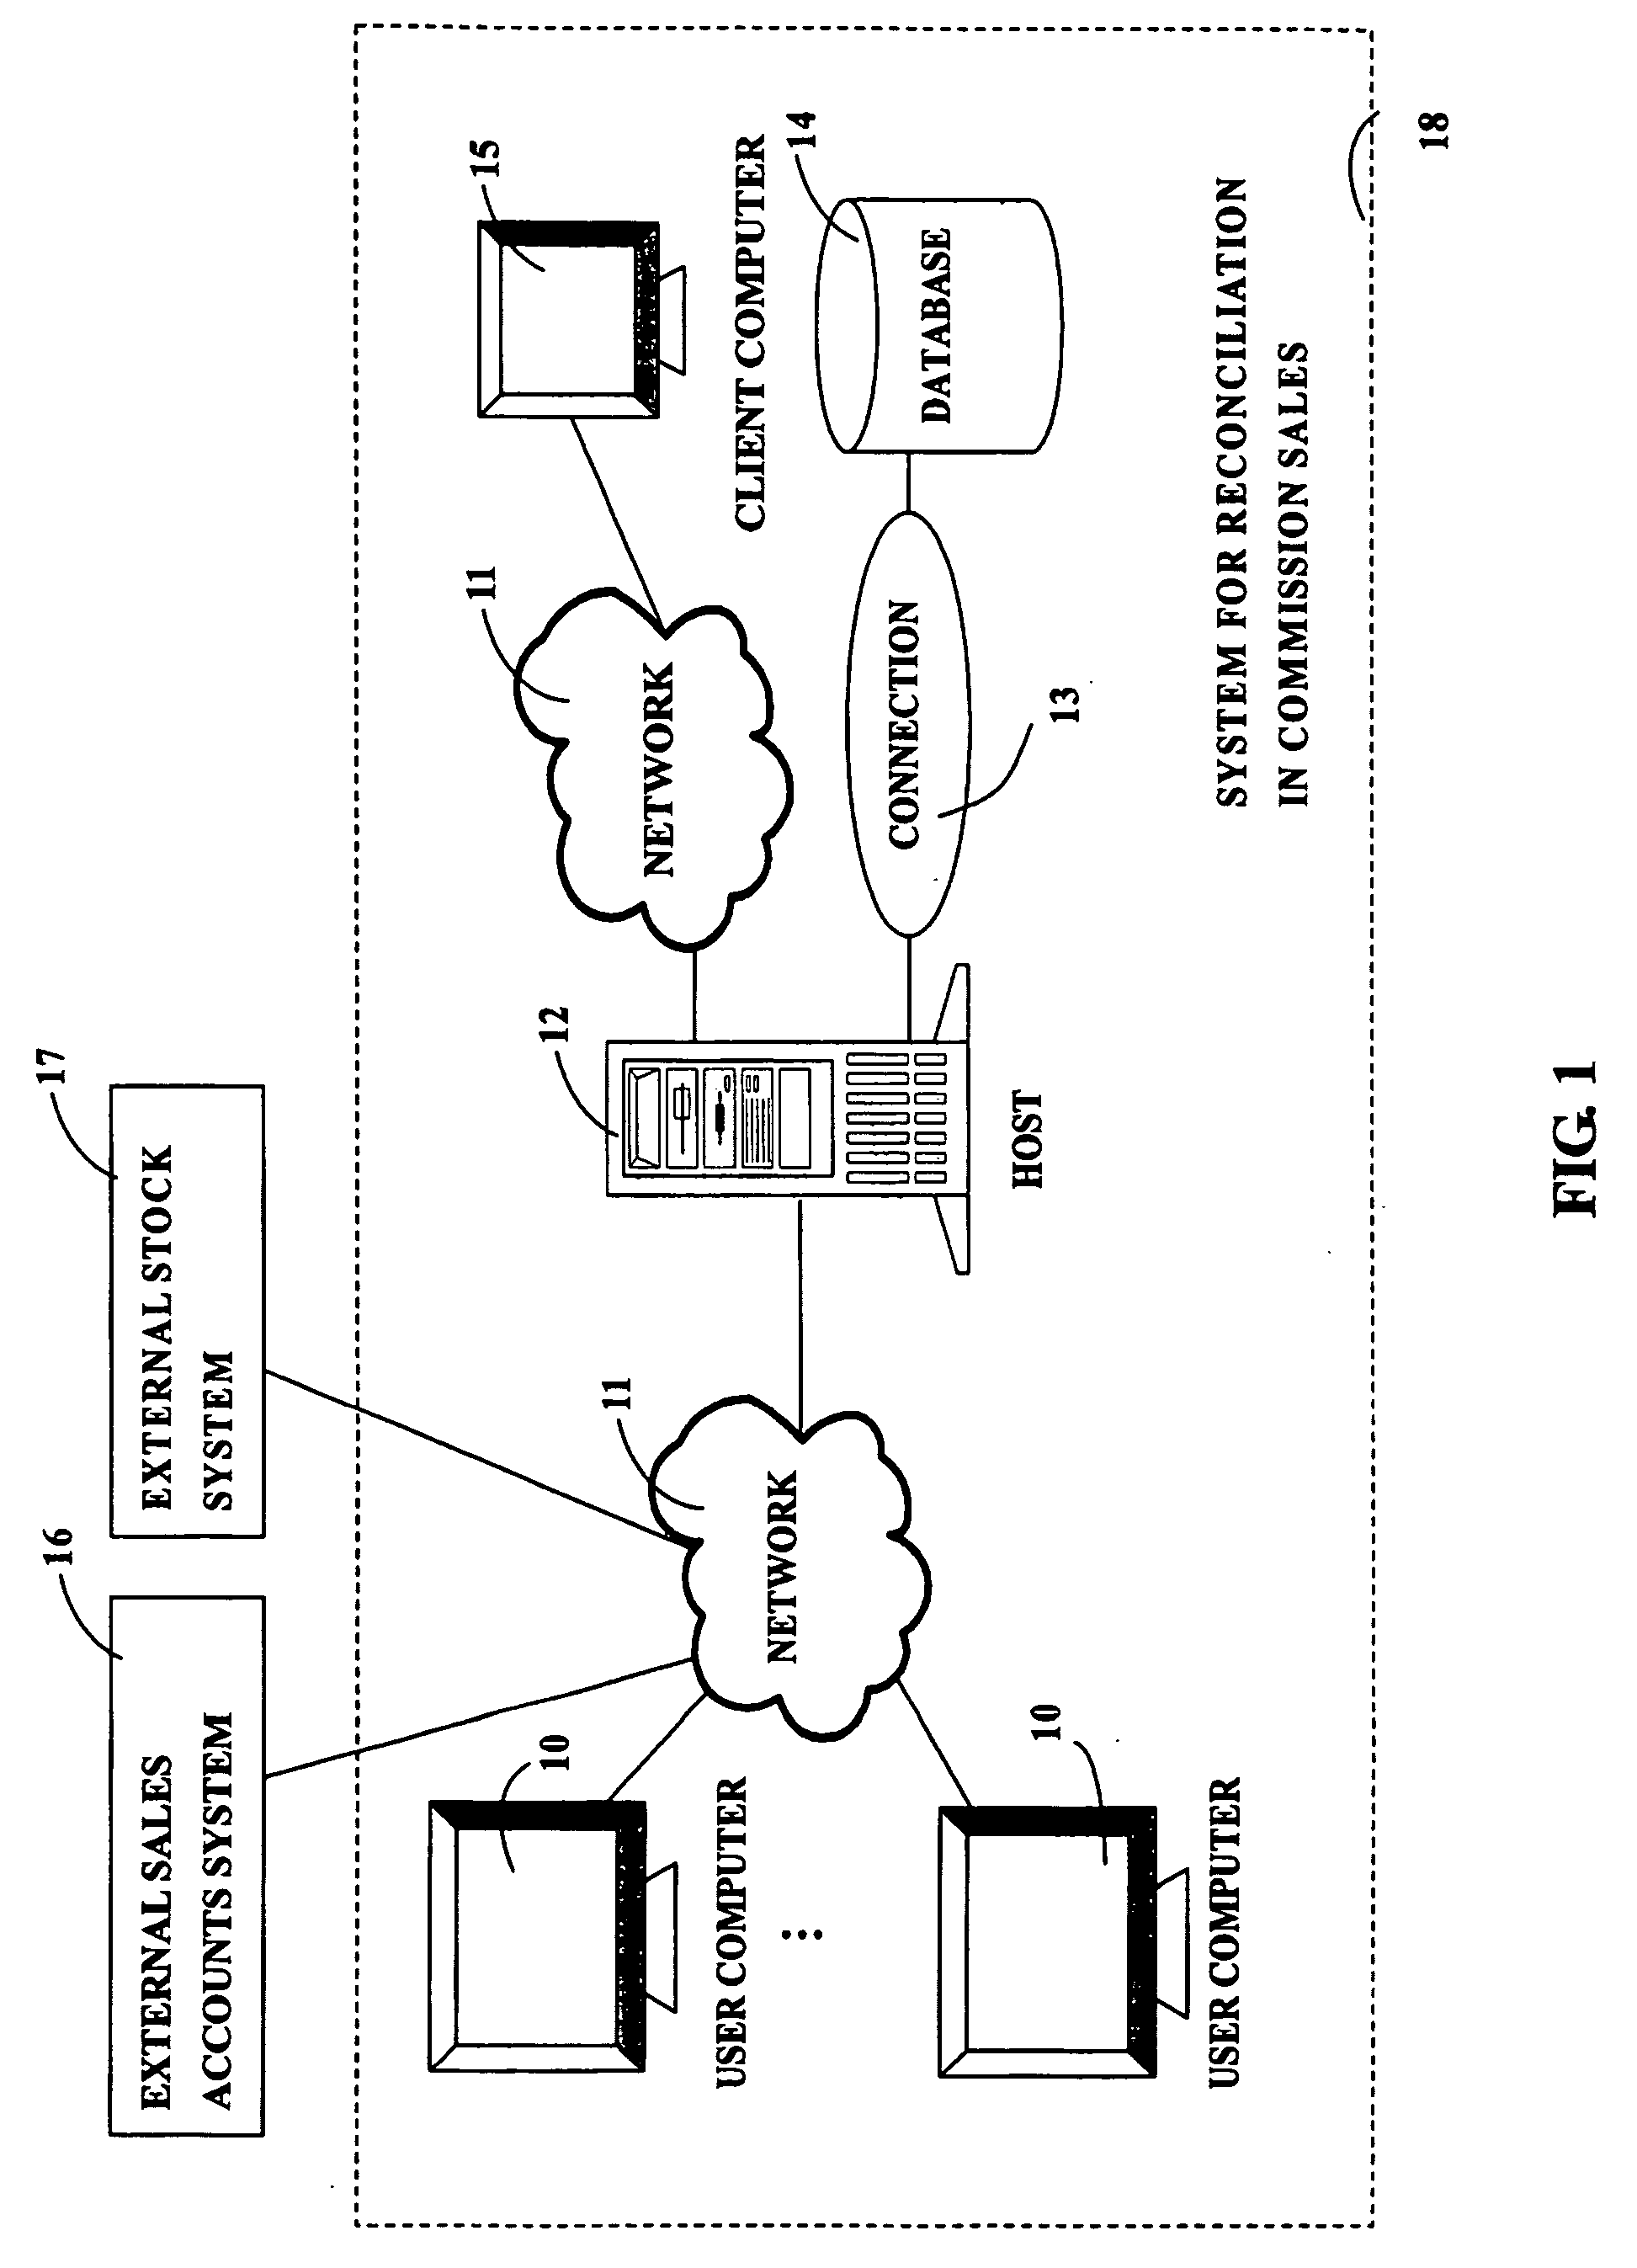 System and method for reconciliation in commission sales